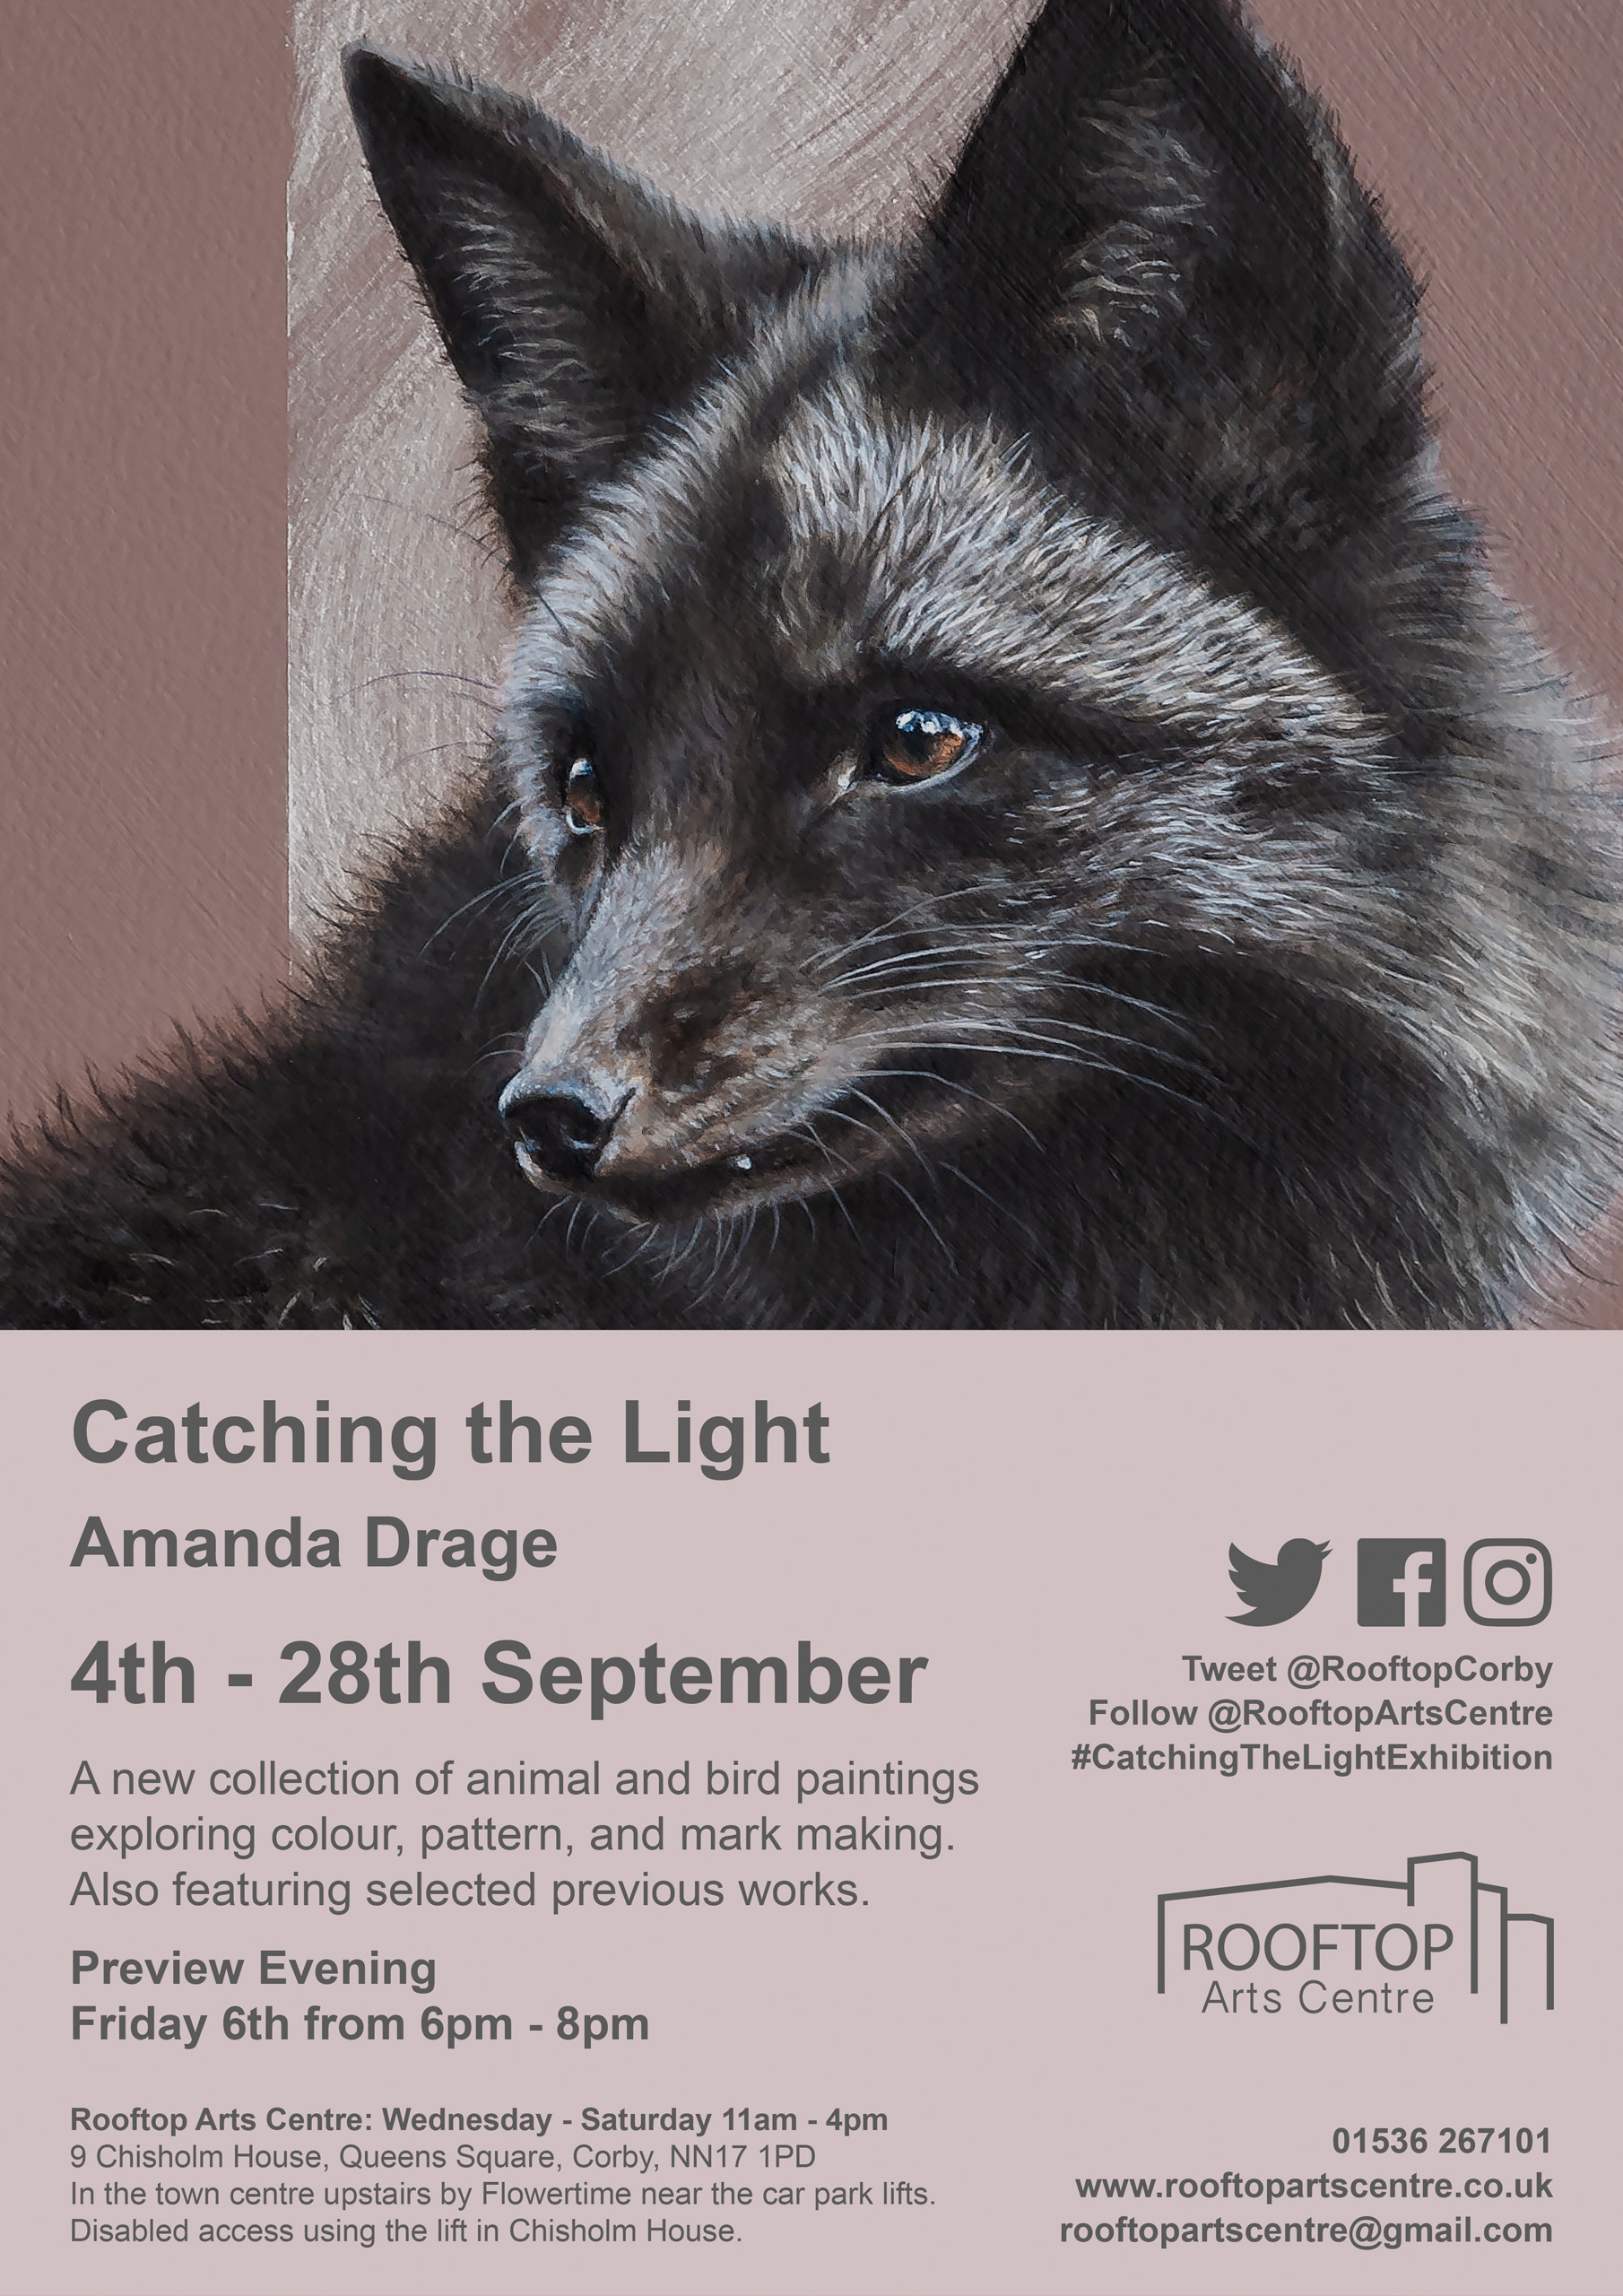 Poster advertising Catching The Light Exhibition by artist Amanda Drage